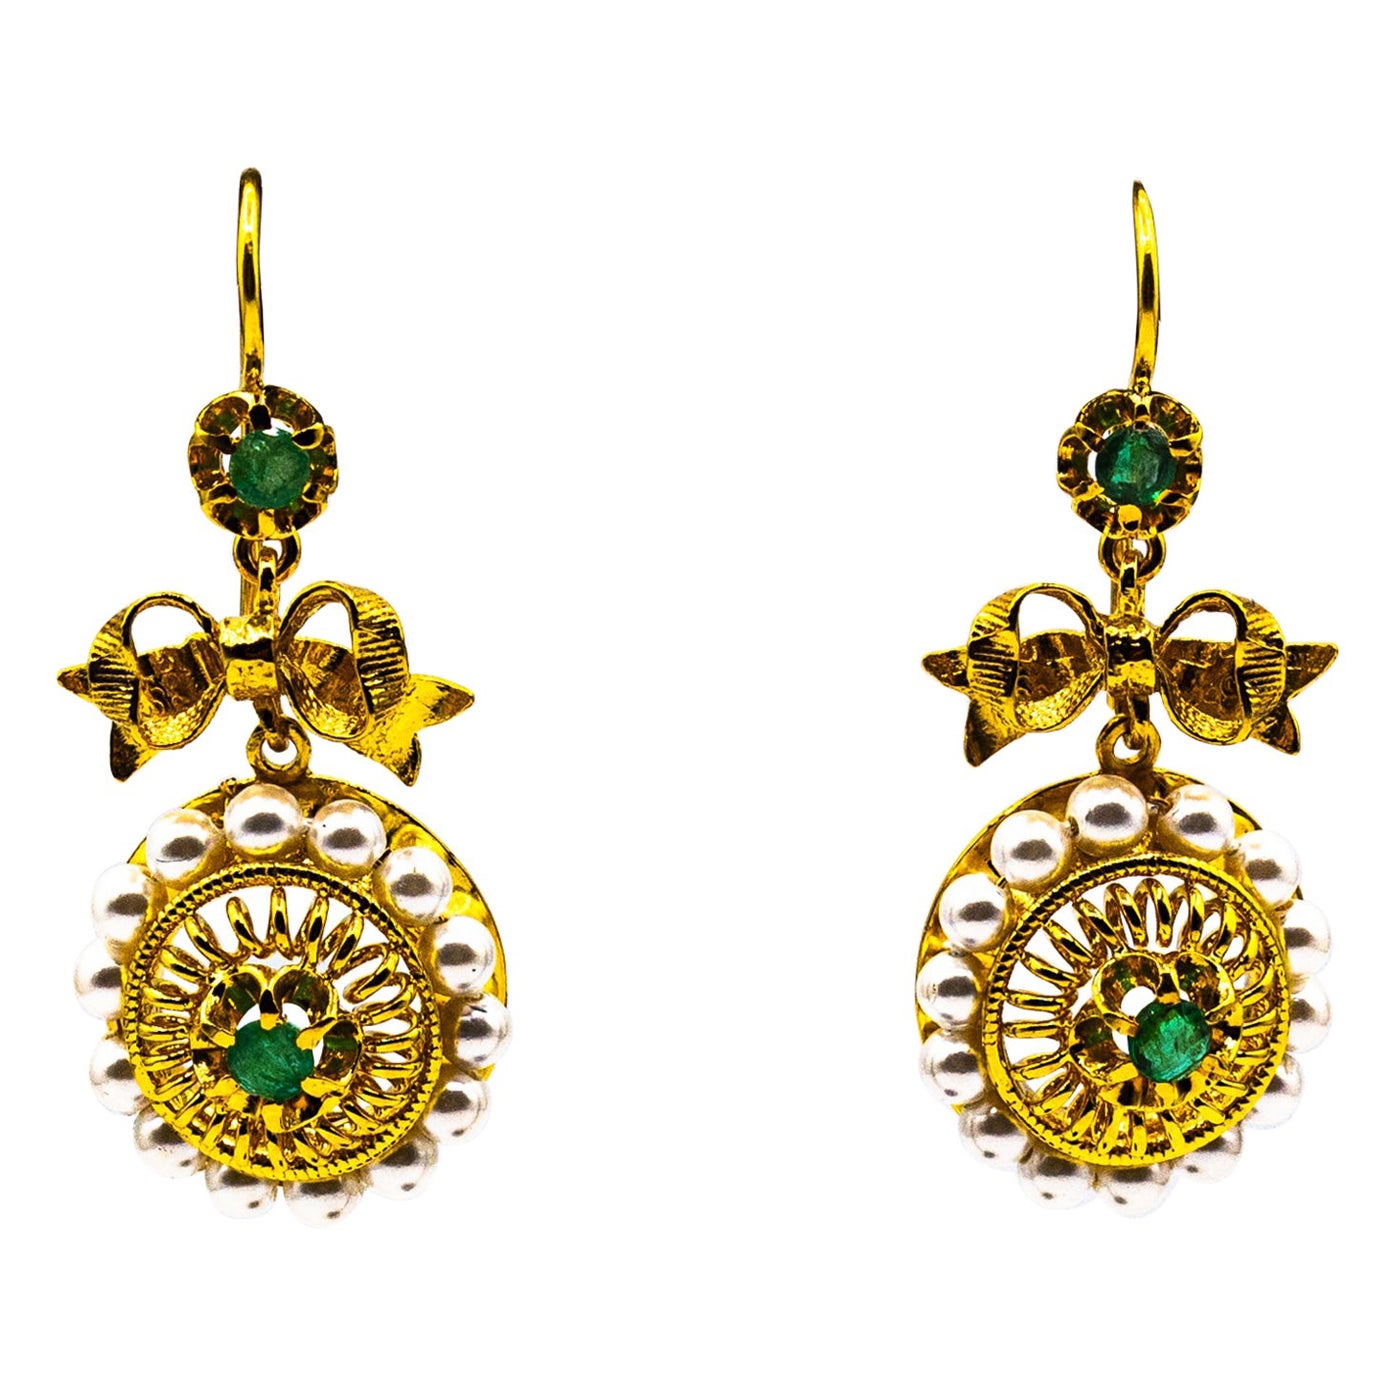 Art Deco Style Micro Pearls 0.70 Carat Emerald Yellow Gold Drop Stud Earrings For Sale